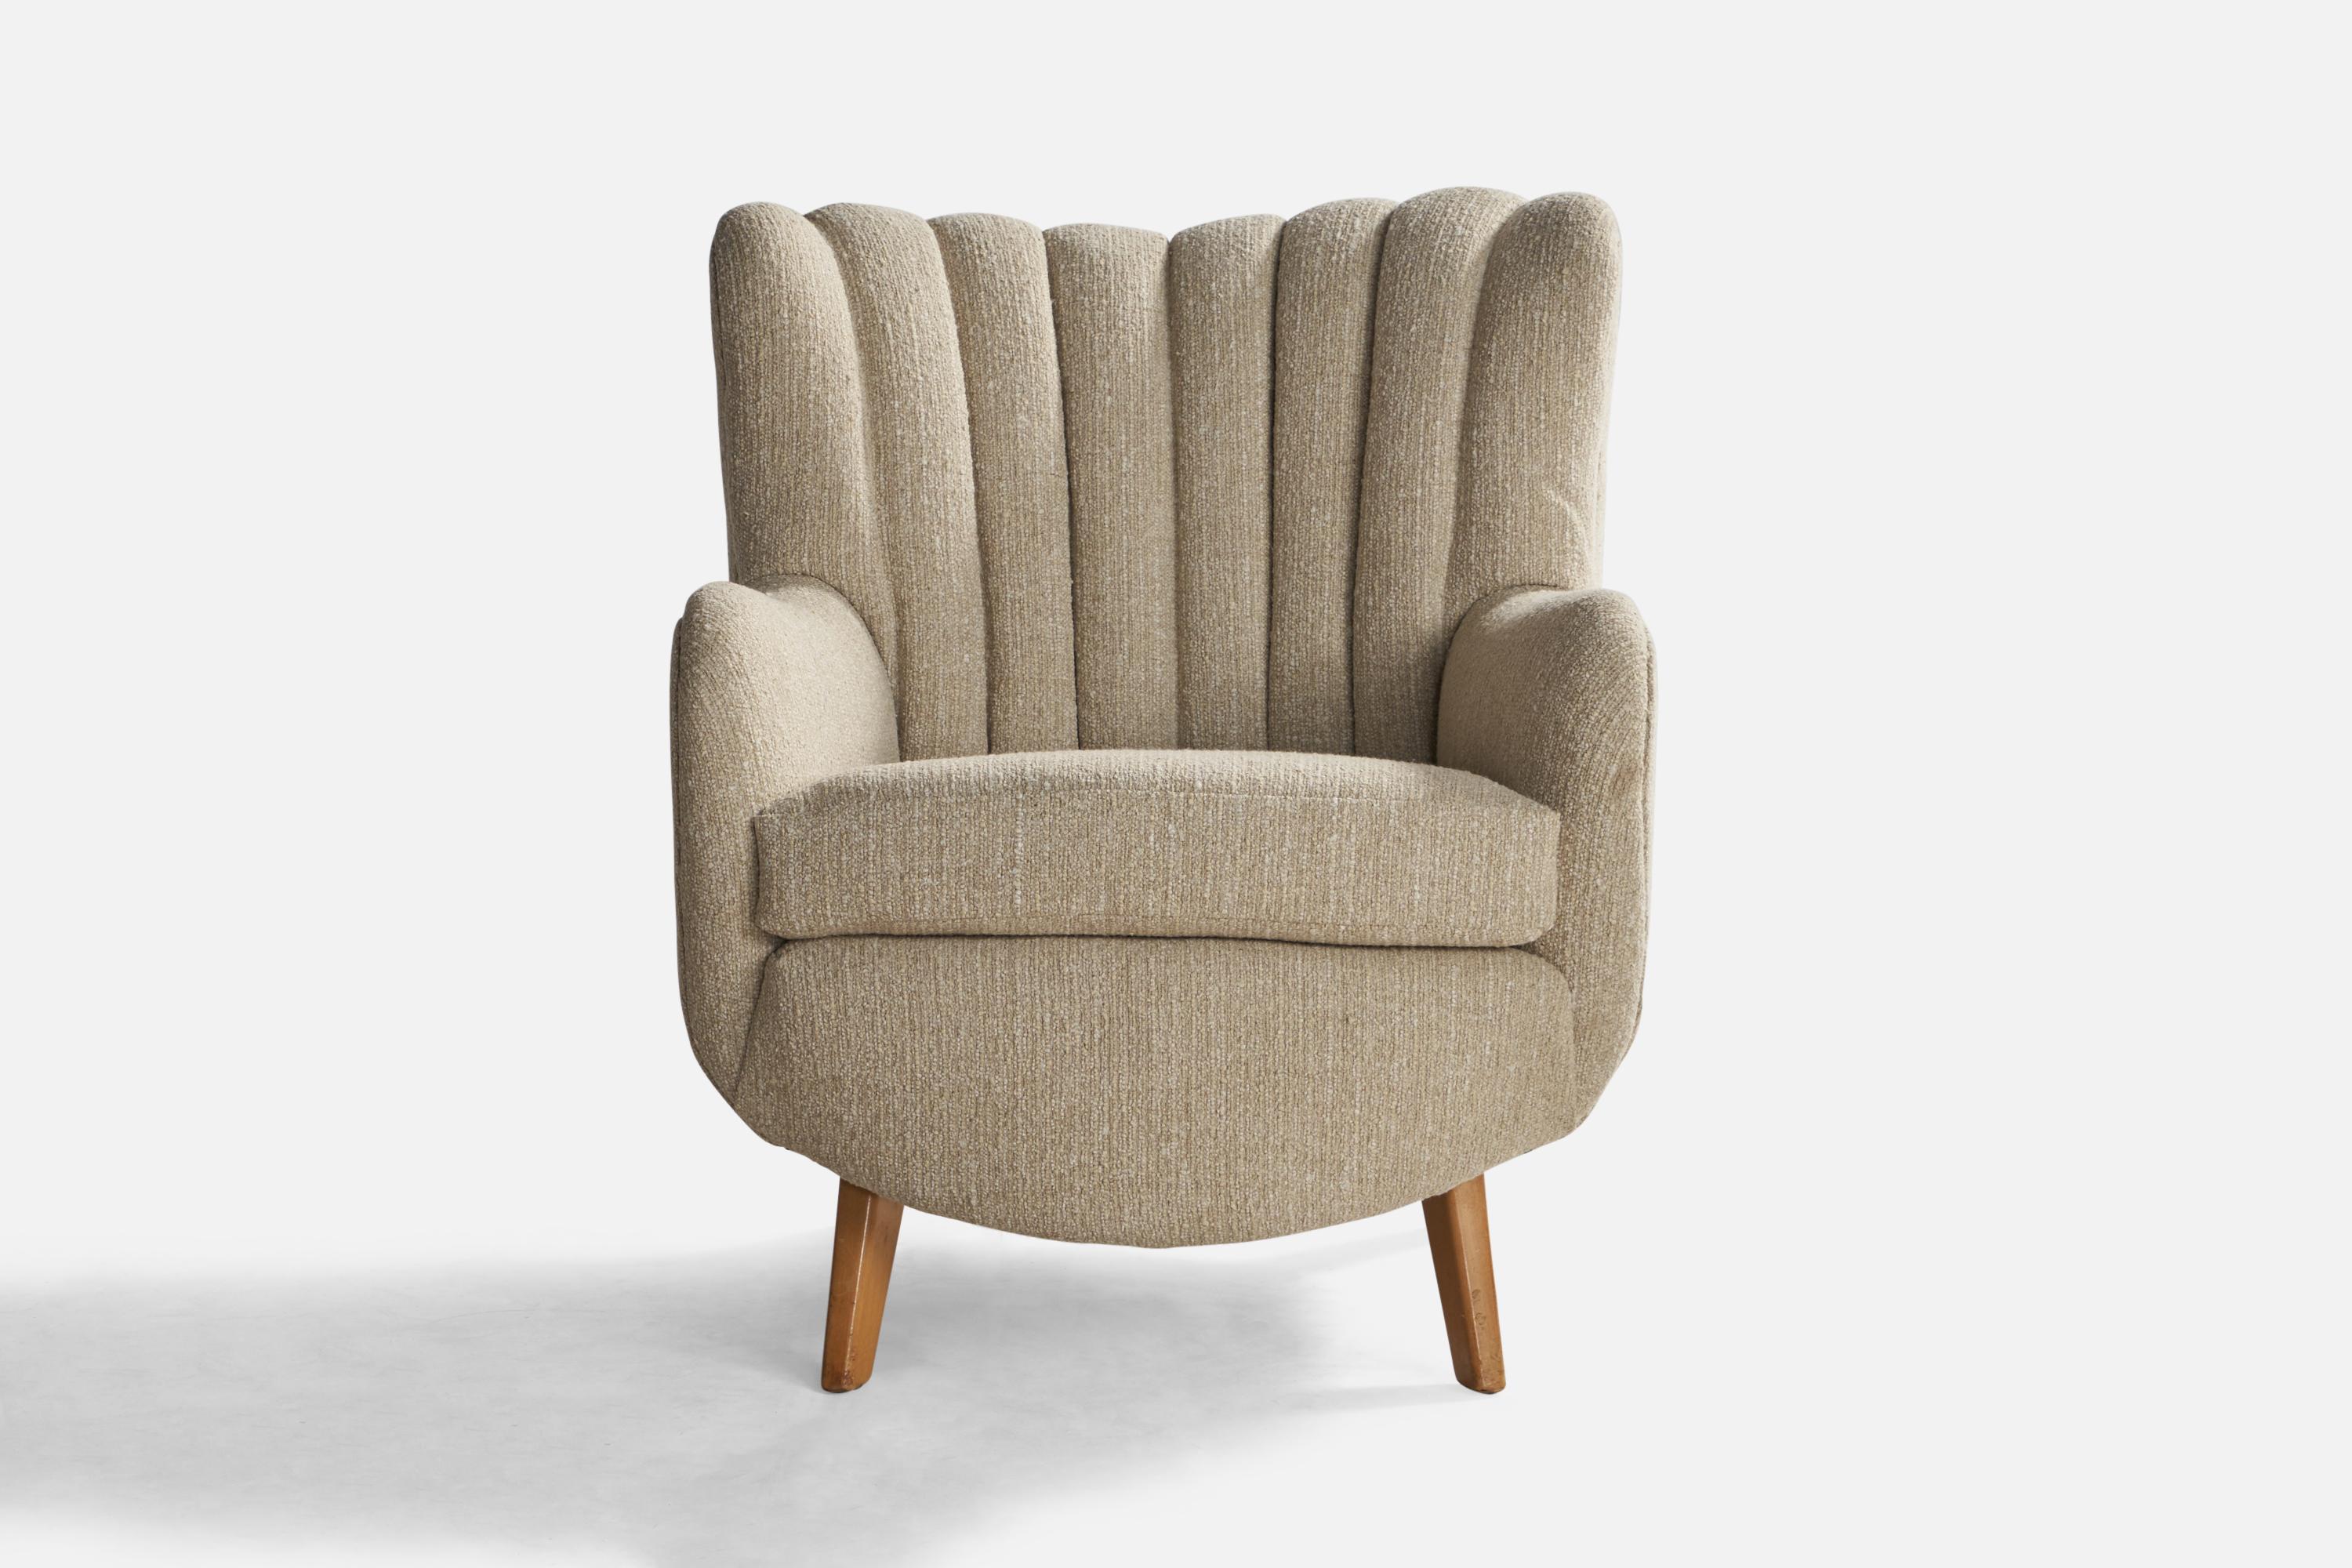 A rare wood and beige grey bouclé fabric model 4688 lounge chair designed by George Nelson and produced by Herman Miller, USA, c. 1940s.

Seat height: 18.5”